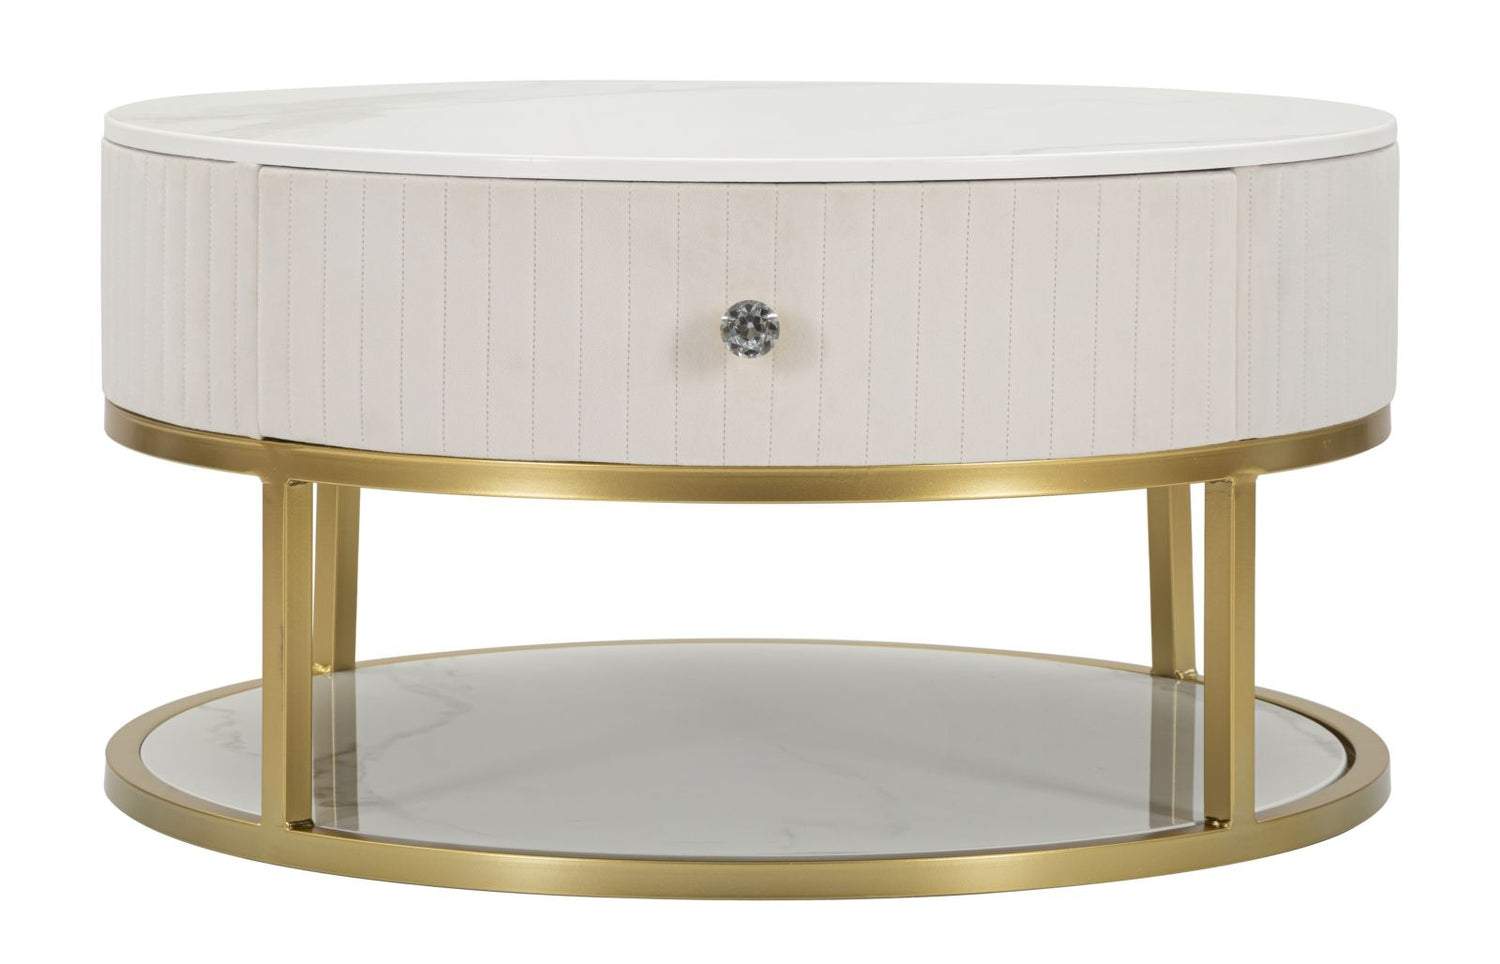 Buy Wood and metal coffee table upholstered with fabric, 2 drawers, Montpellier Cream / Gold, Ø75xH36 cm online, best price, free delivery